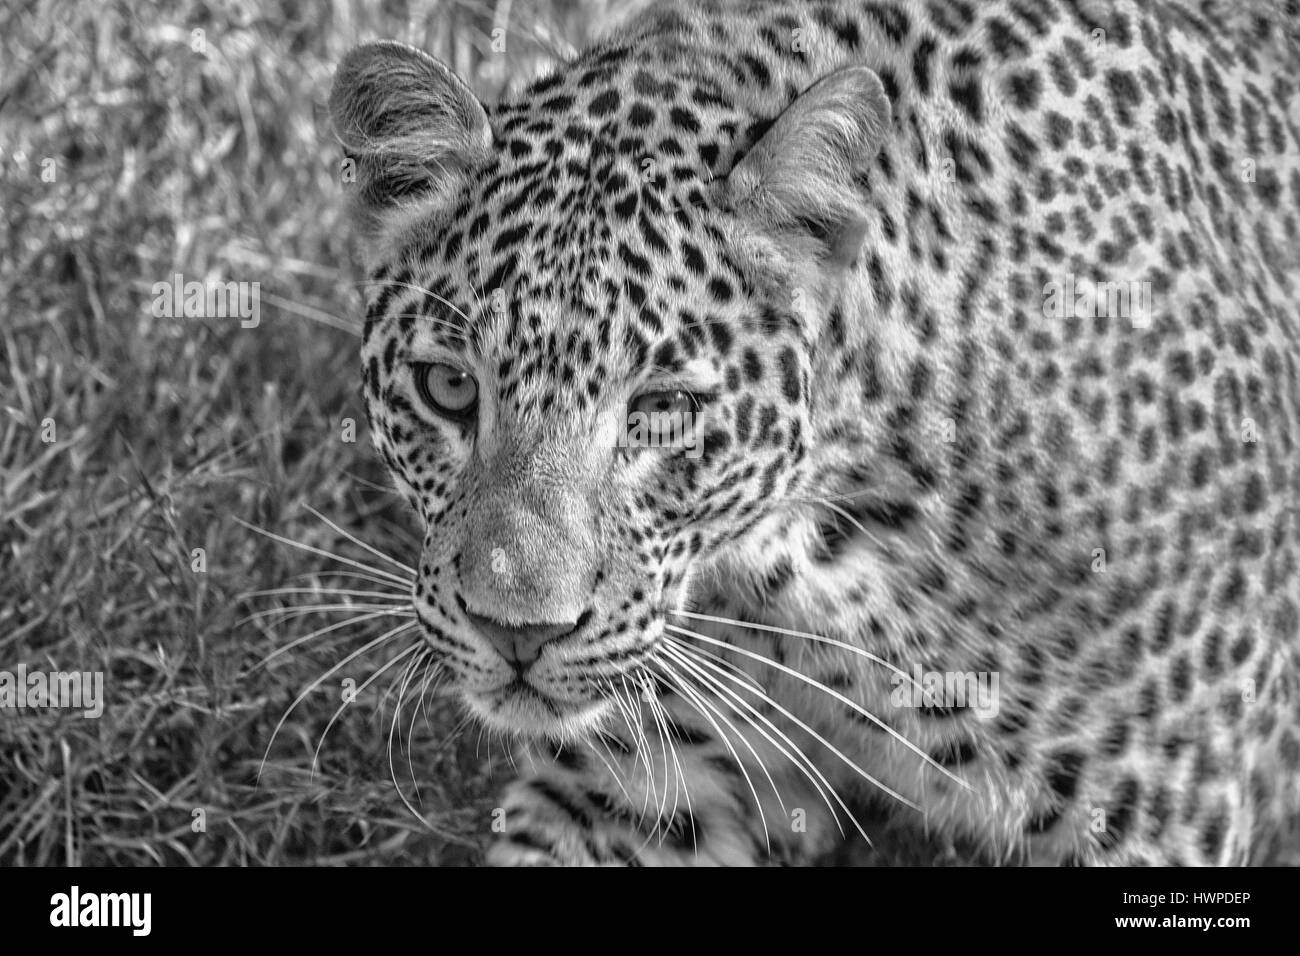 Leopard skin not wild not animal Black and White Stock Photos